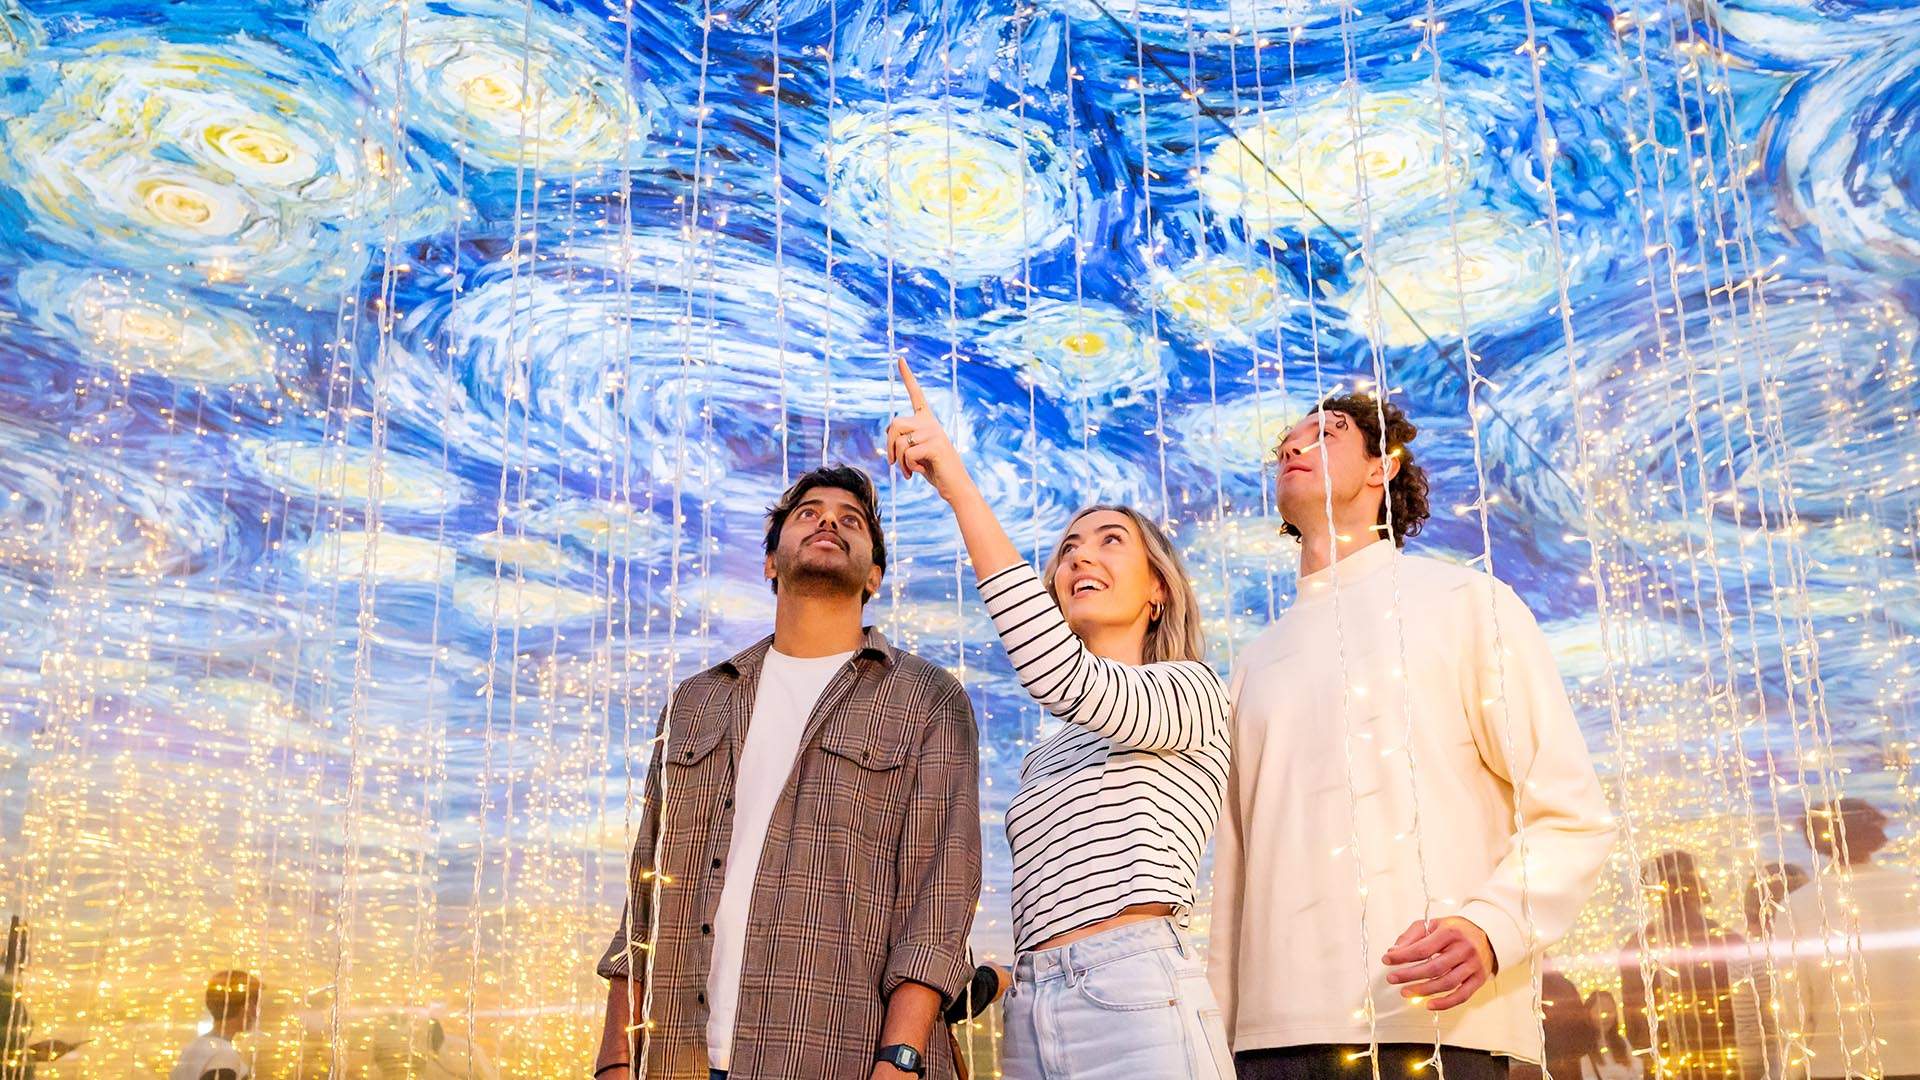 Dazzling Multi-Sensory Exhibition 'Van Gogh Alive' Is Bringing Its Stars and Sunflowers Back to Sydney